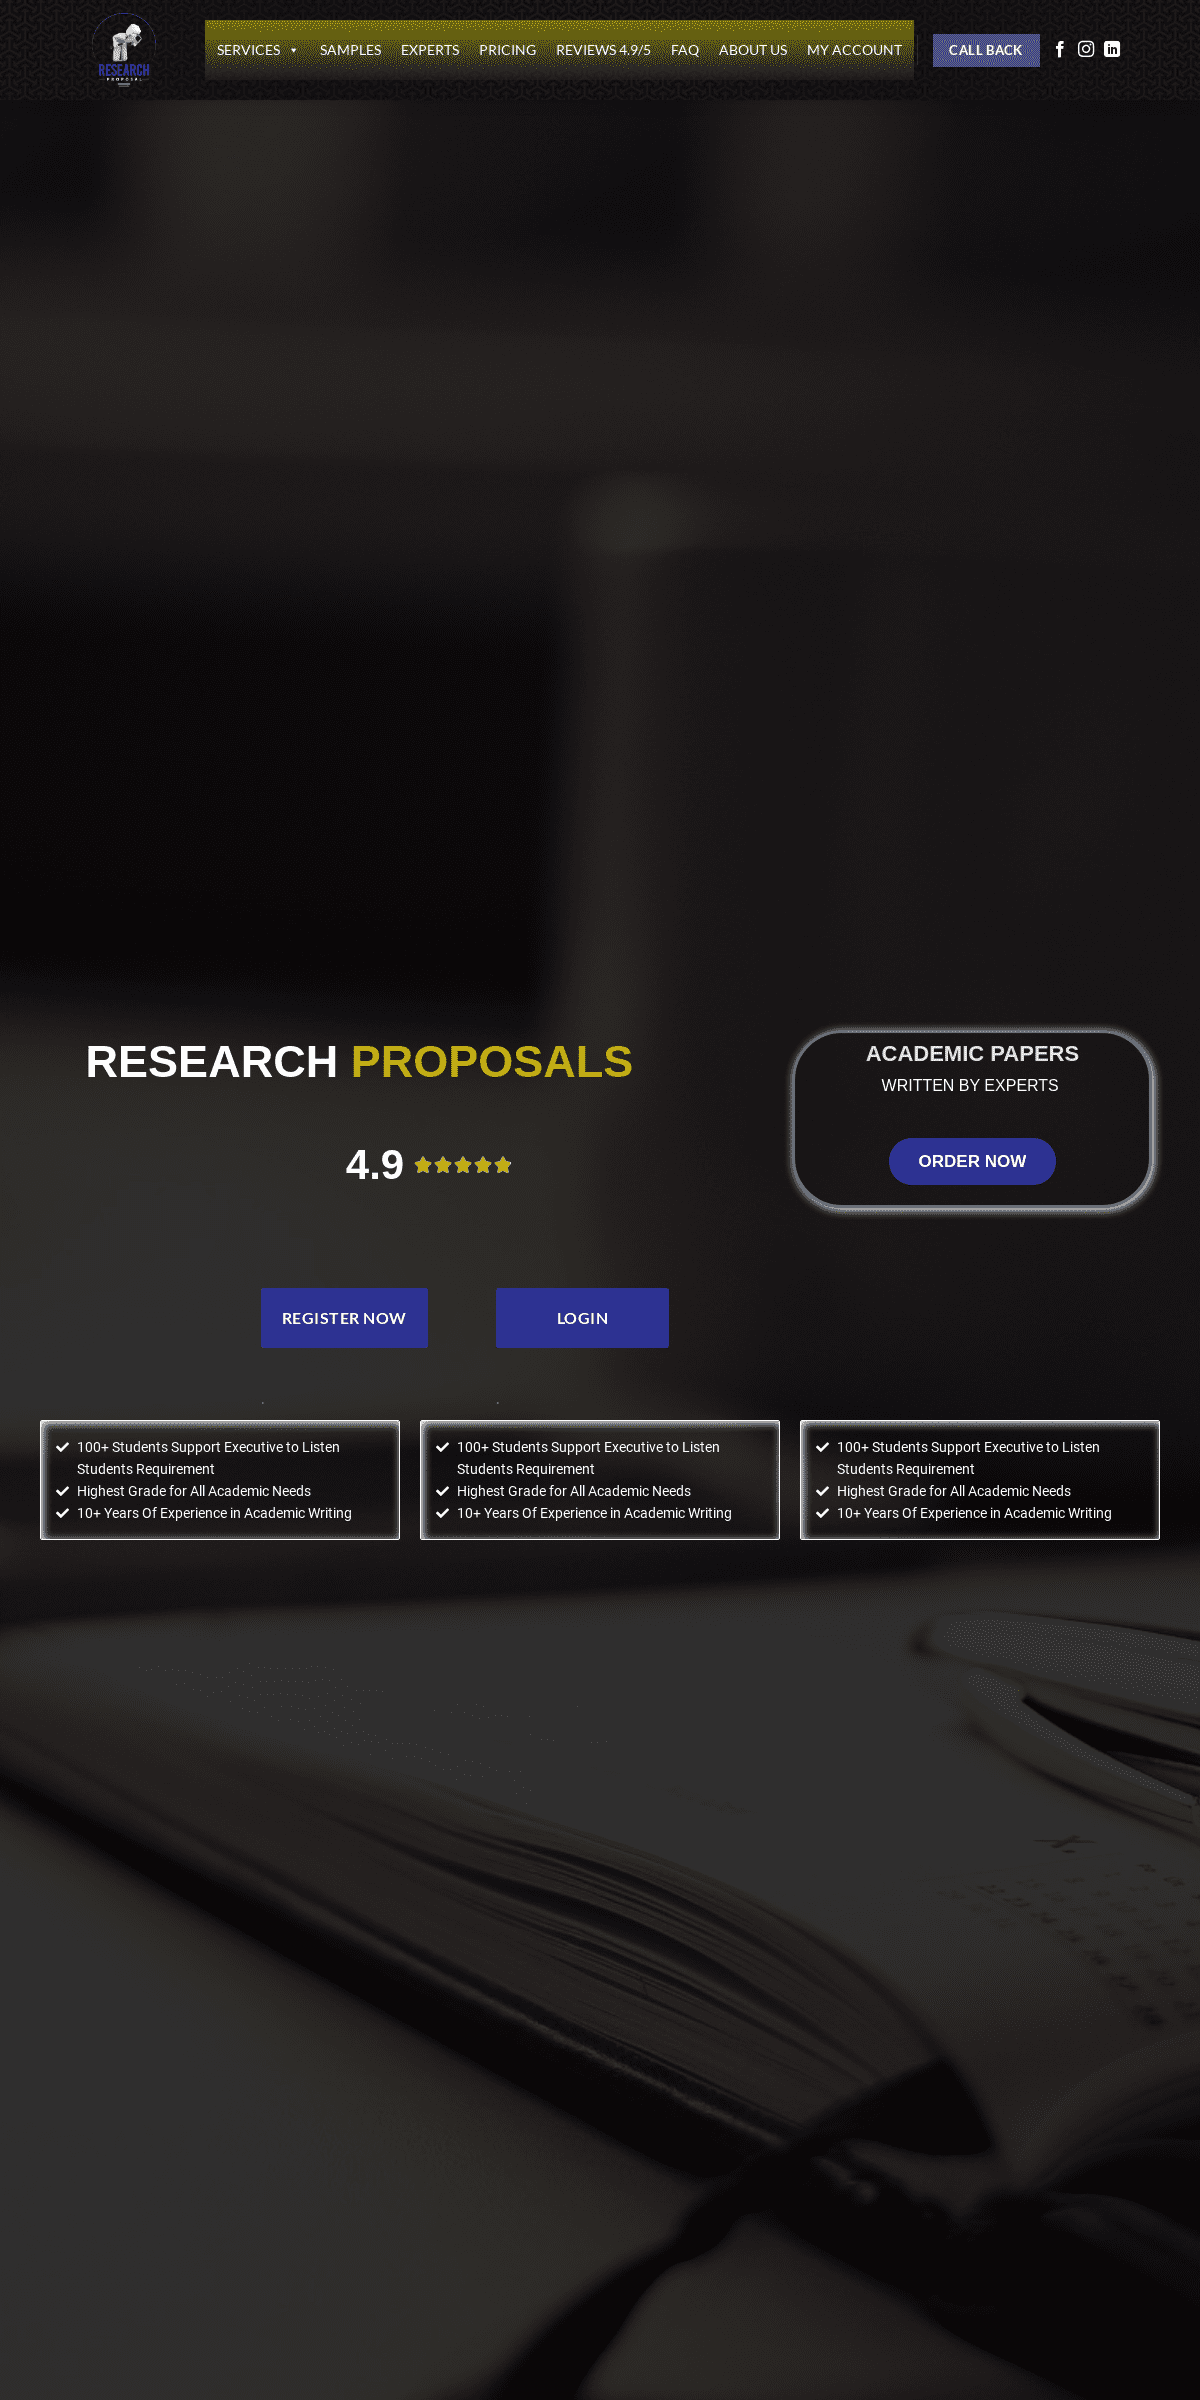 A complete backup of researchproposals.co.uk